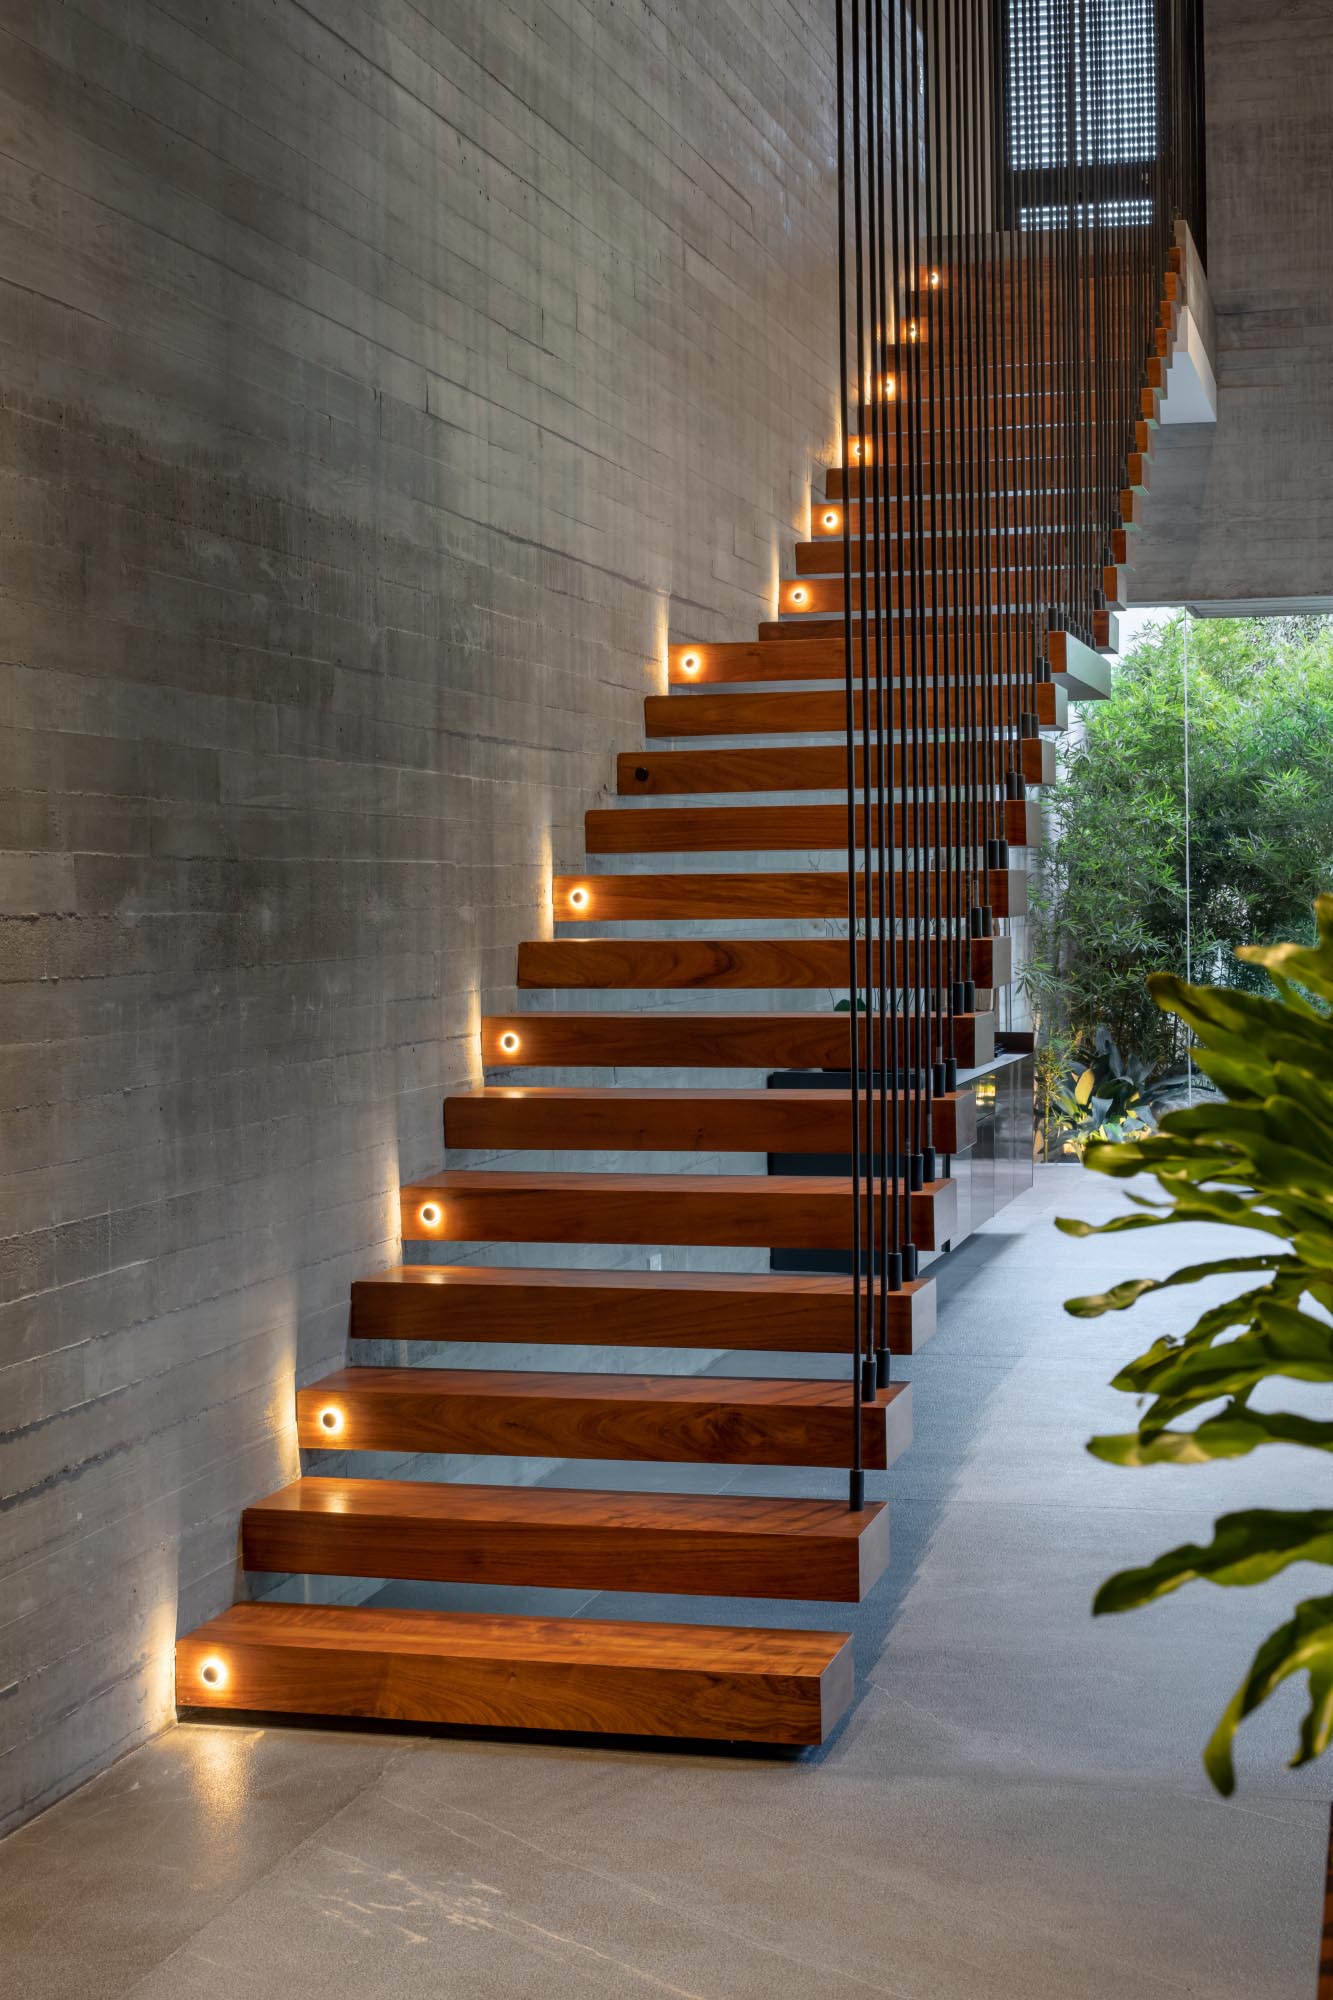 A board-formed concrete wall is visible alongside a wood staircase, which also lights up at night.